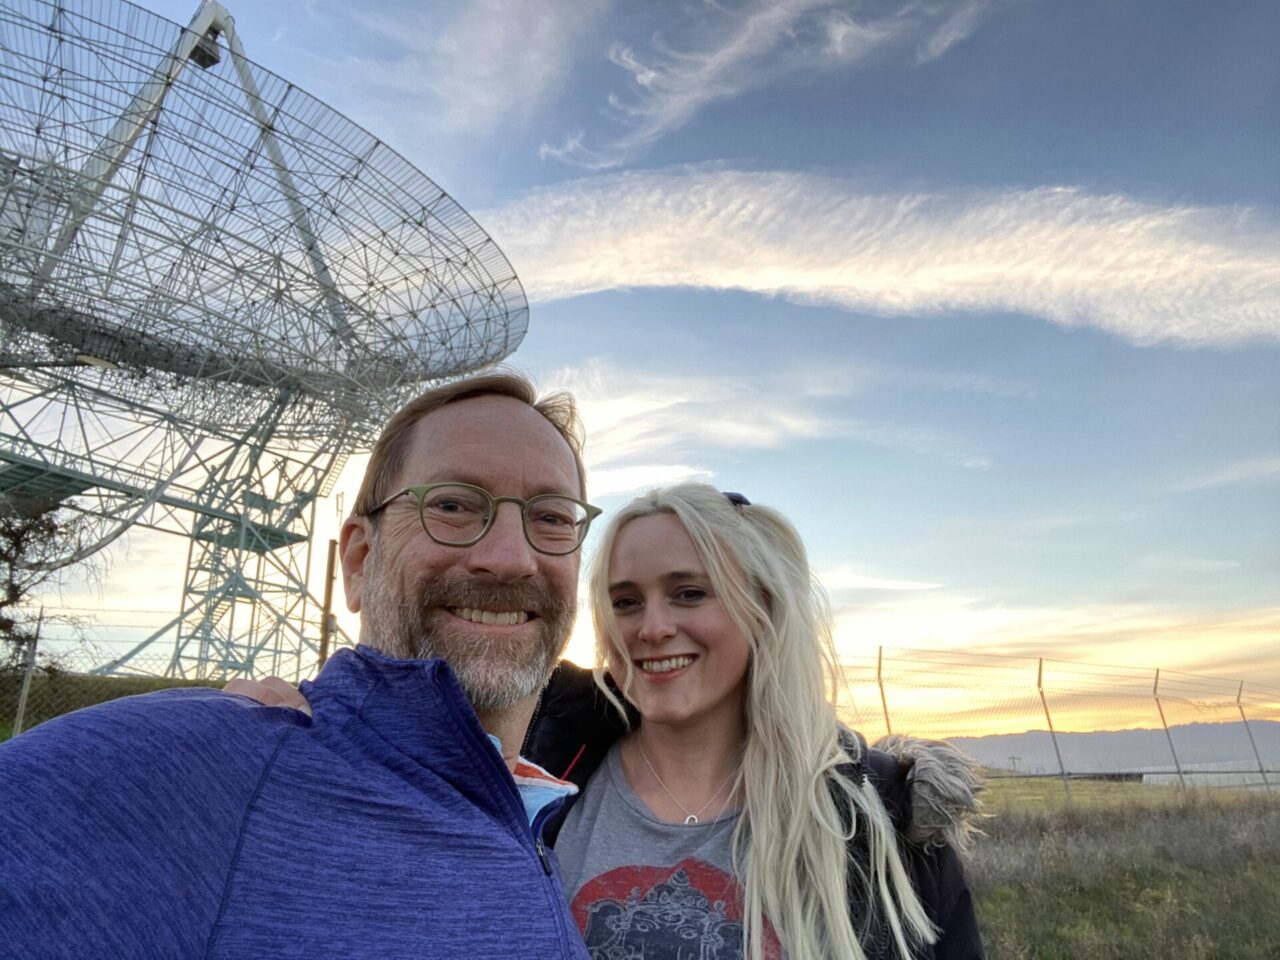 Dany & Eric hiking the stanford dish trail with the dish in the background